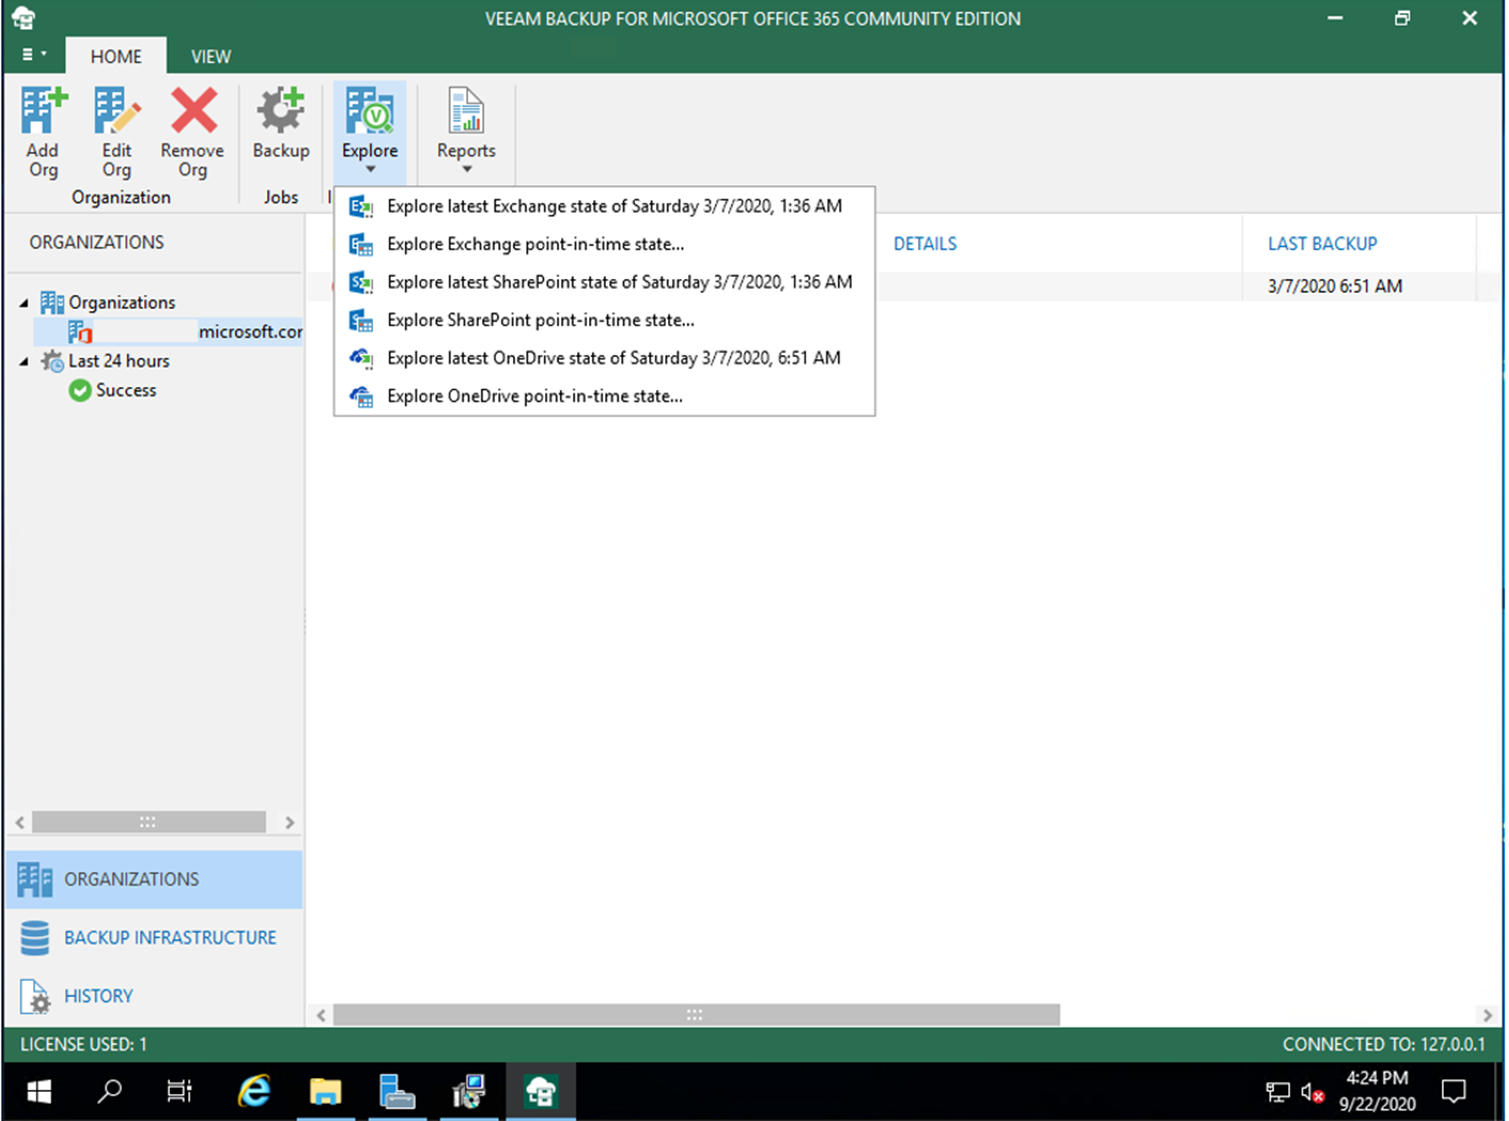 100320 2346 HowtoUpgrad20 - How to Upgrade Veeam Backup for Microsoft Office 365 to V4c Day 0 Update